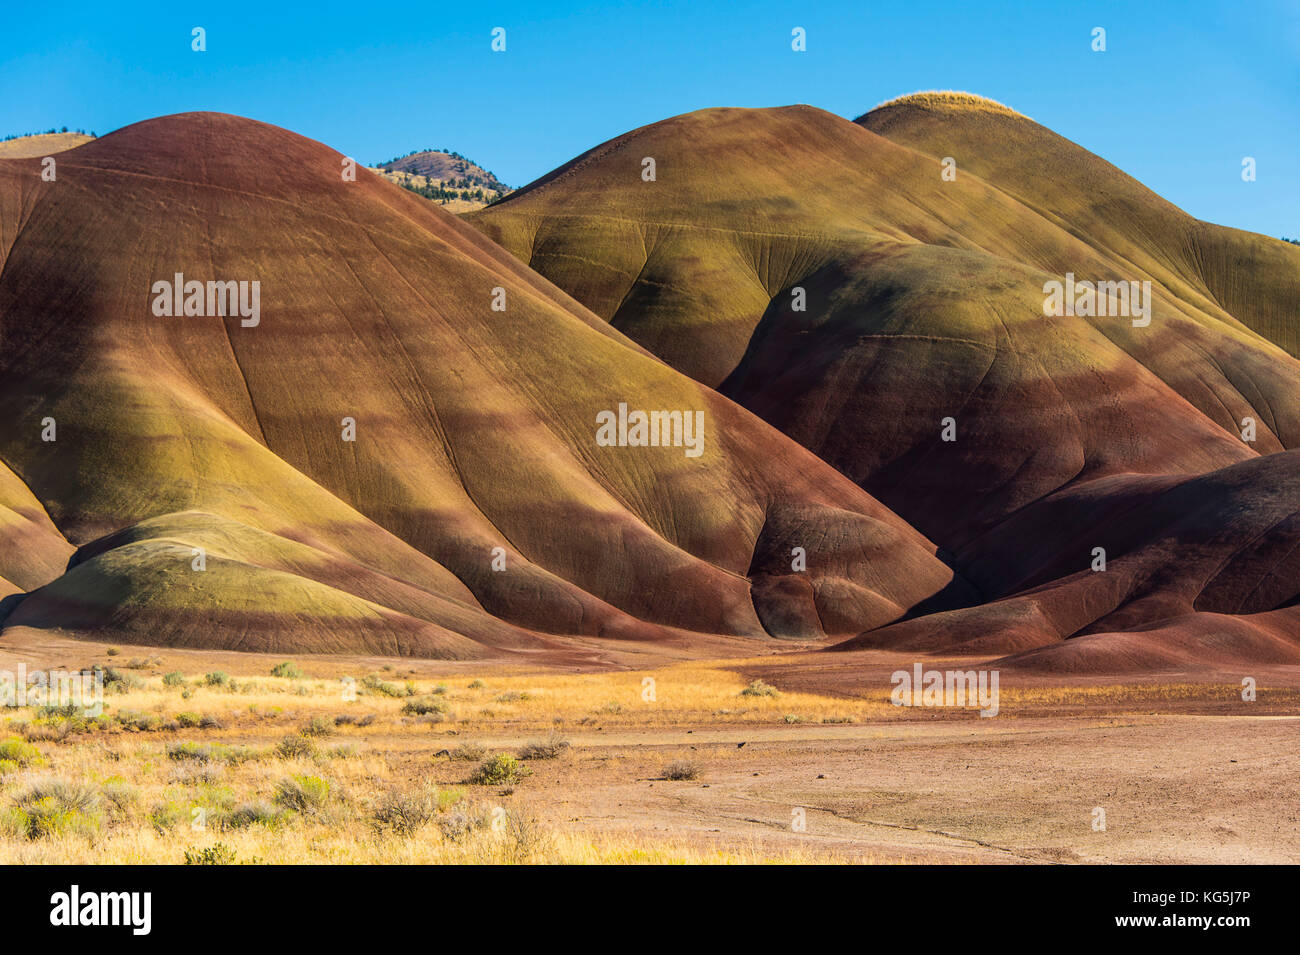 Multicoloured stratas in the Painted hills unit in the John Day fossil beds National Monument, Oregon, USA Stock Photo